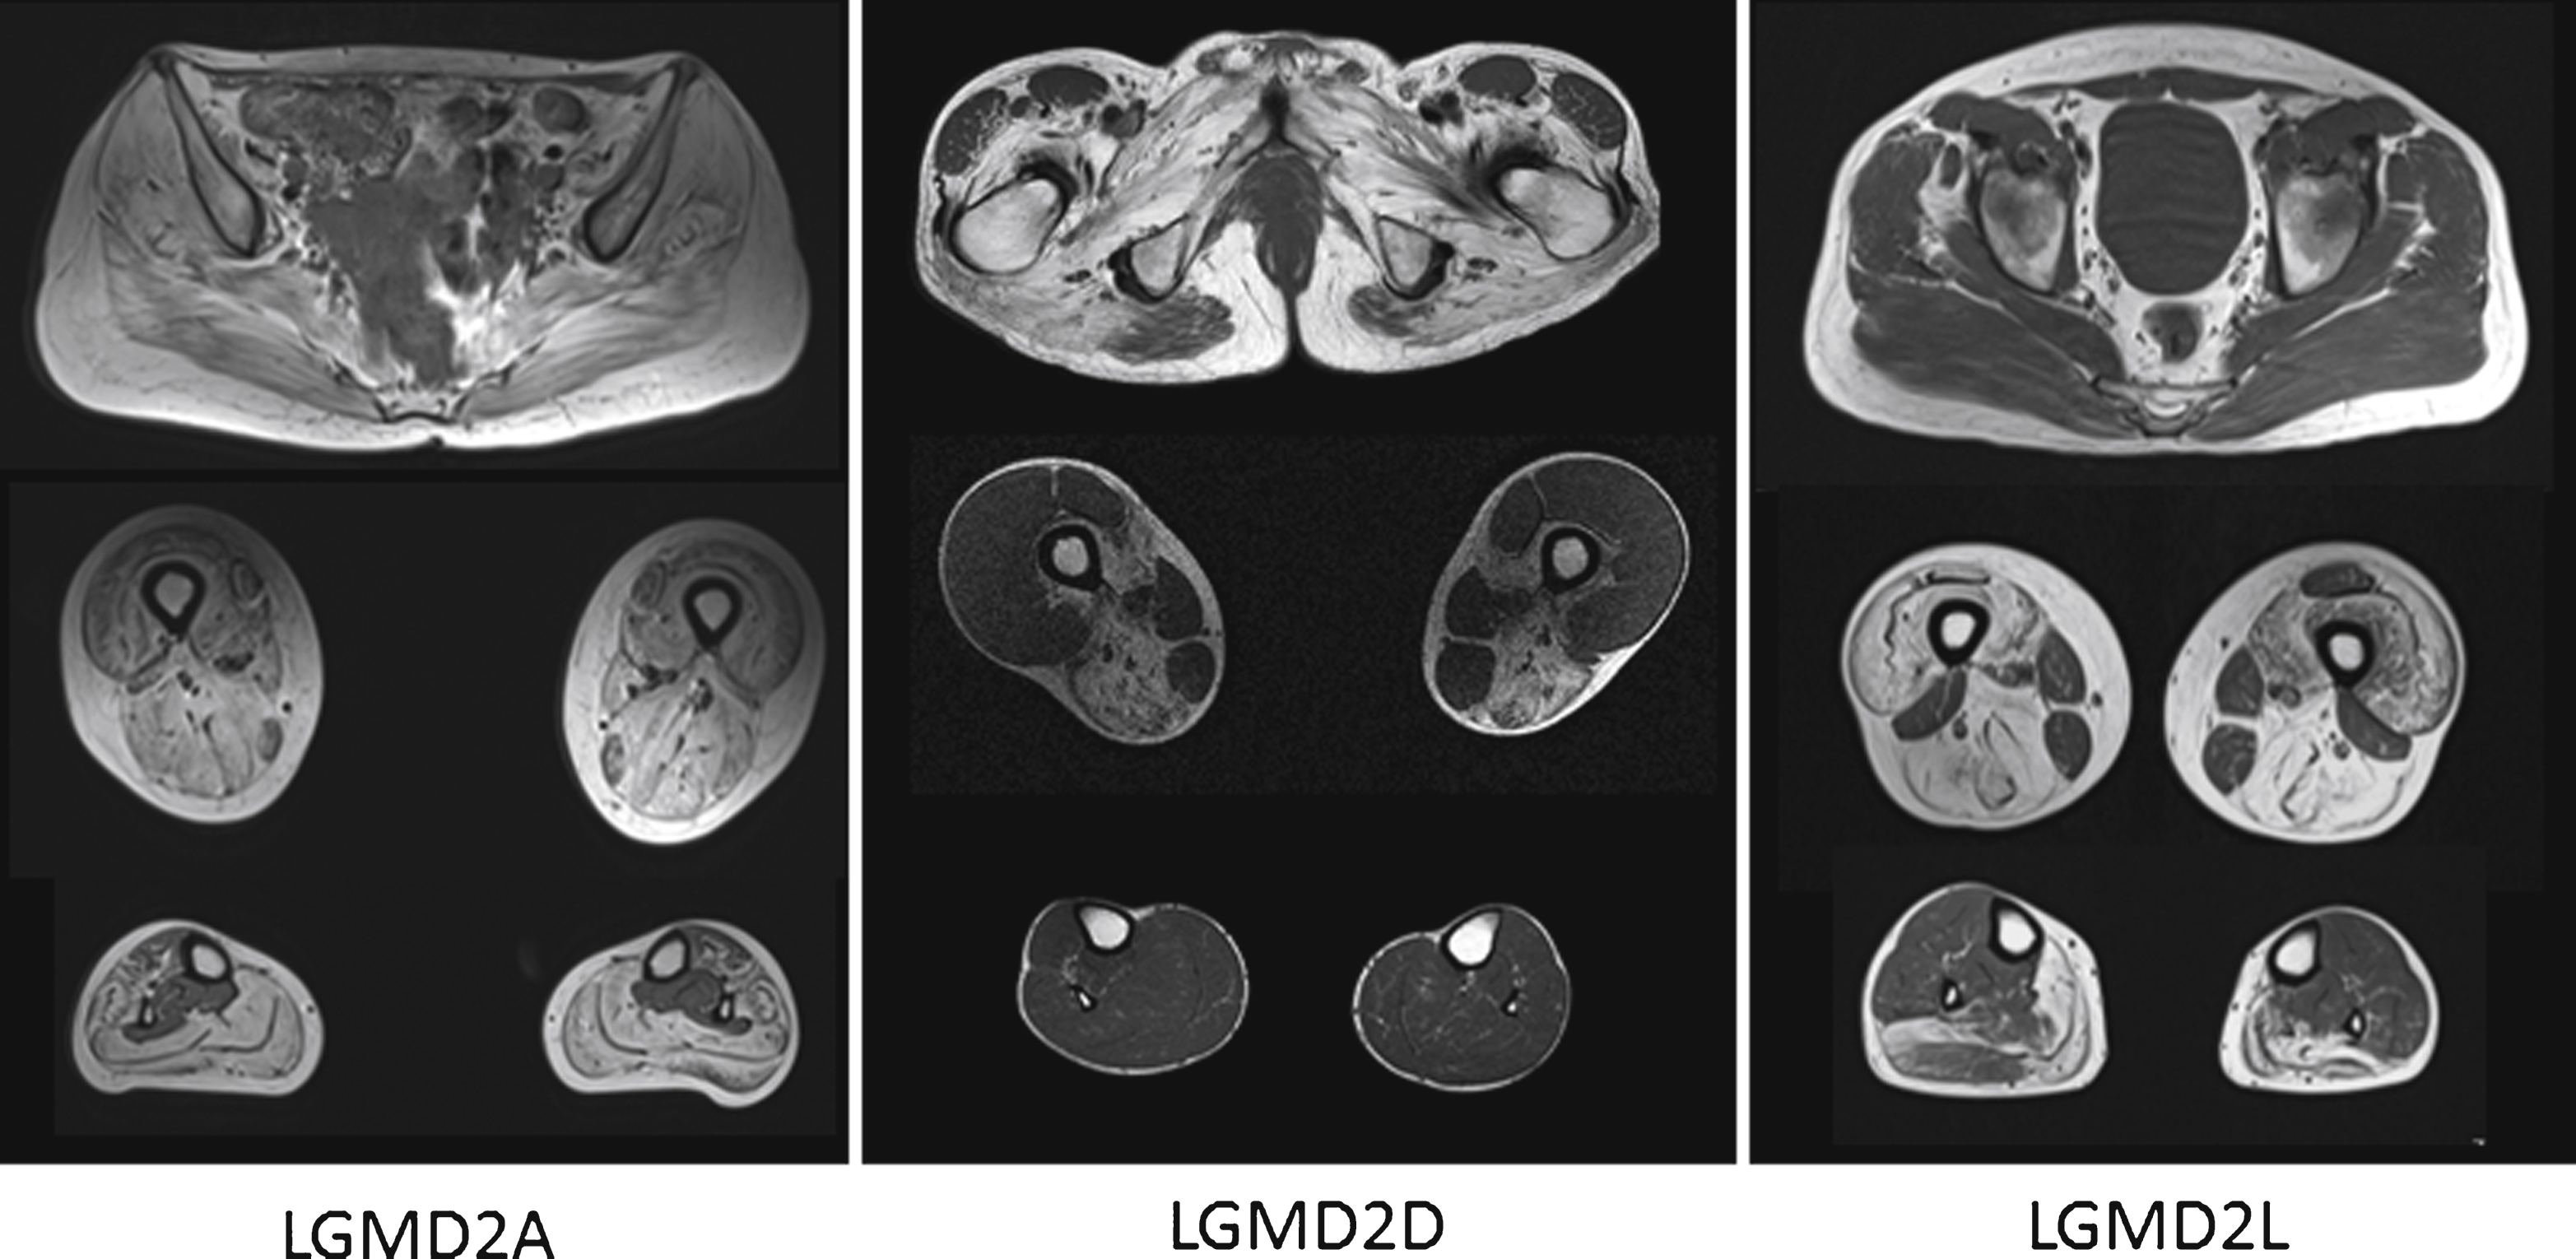 The images above show T1 weighted axial magnetic resonance images of the pelvic girdle and legs muscles of patients with LGMD2A, 2D and 2L. In all patients a selective pattern of muscle pathology can be seen, with advanced changes in the LGMD2A patient, well preserved calf muscles in the LGMD2D patients and well preserved gluteal muscles in the LGMD2L patient.